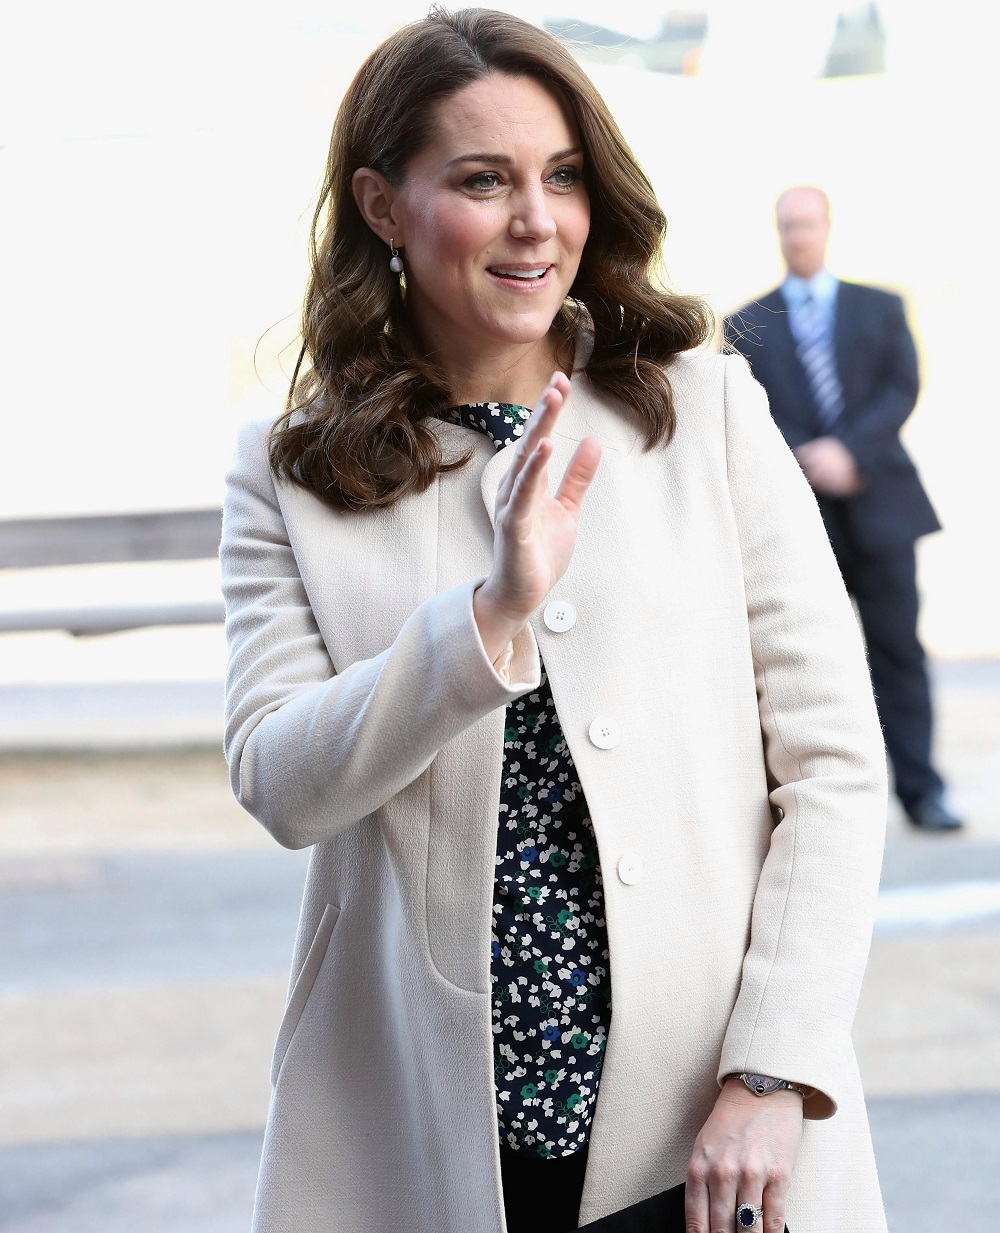 Kate Middleton Gives Birth To A Baby Boy